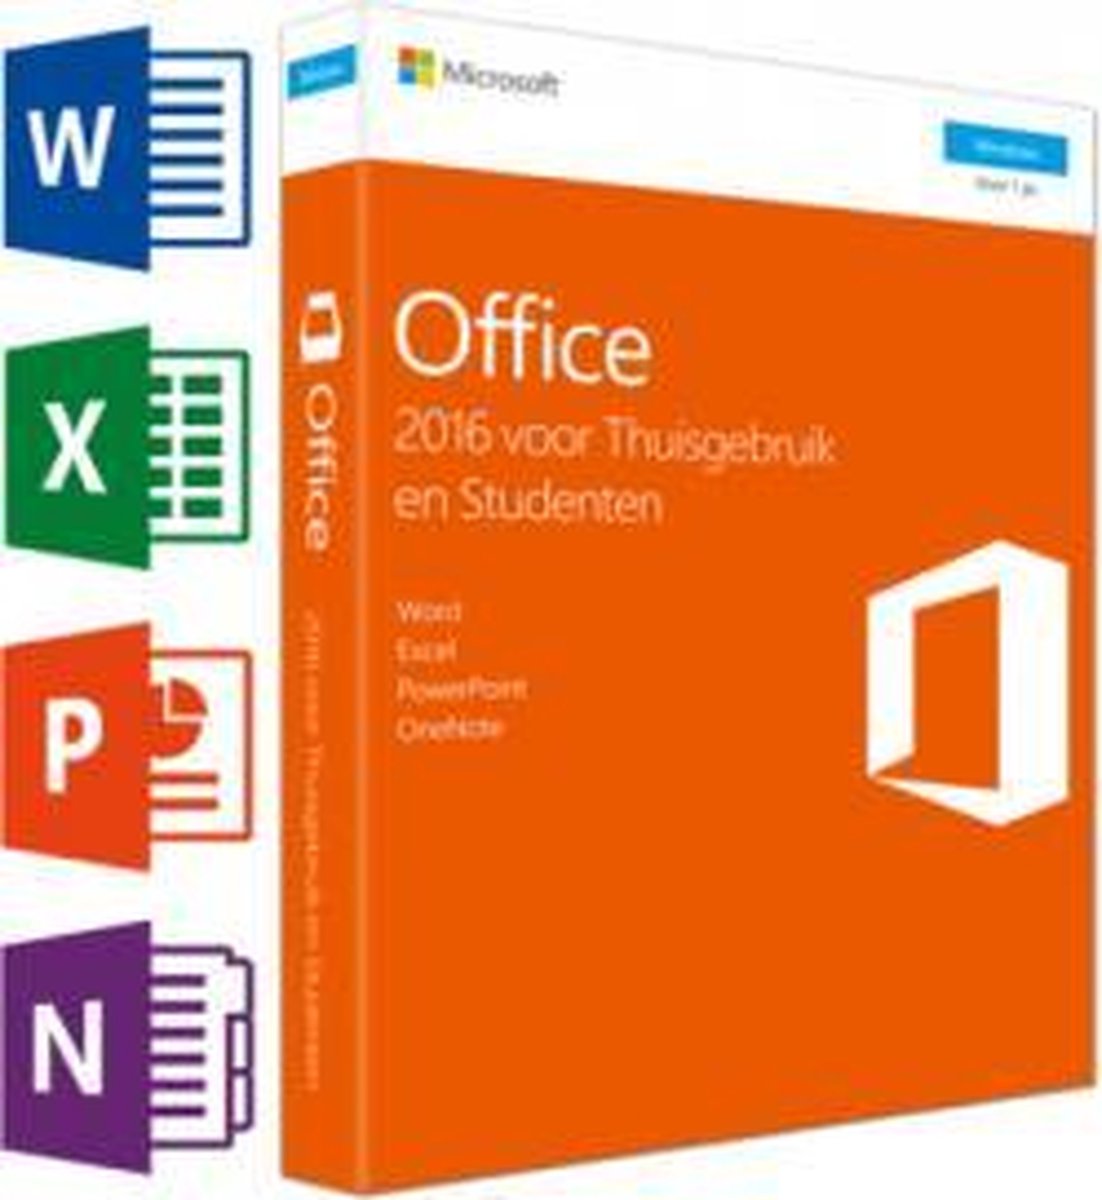 microsoft office 2016 download with student id